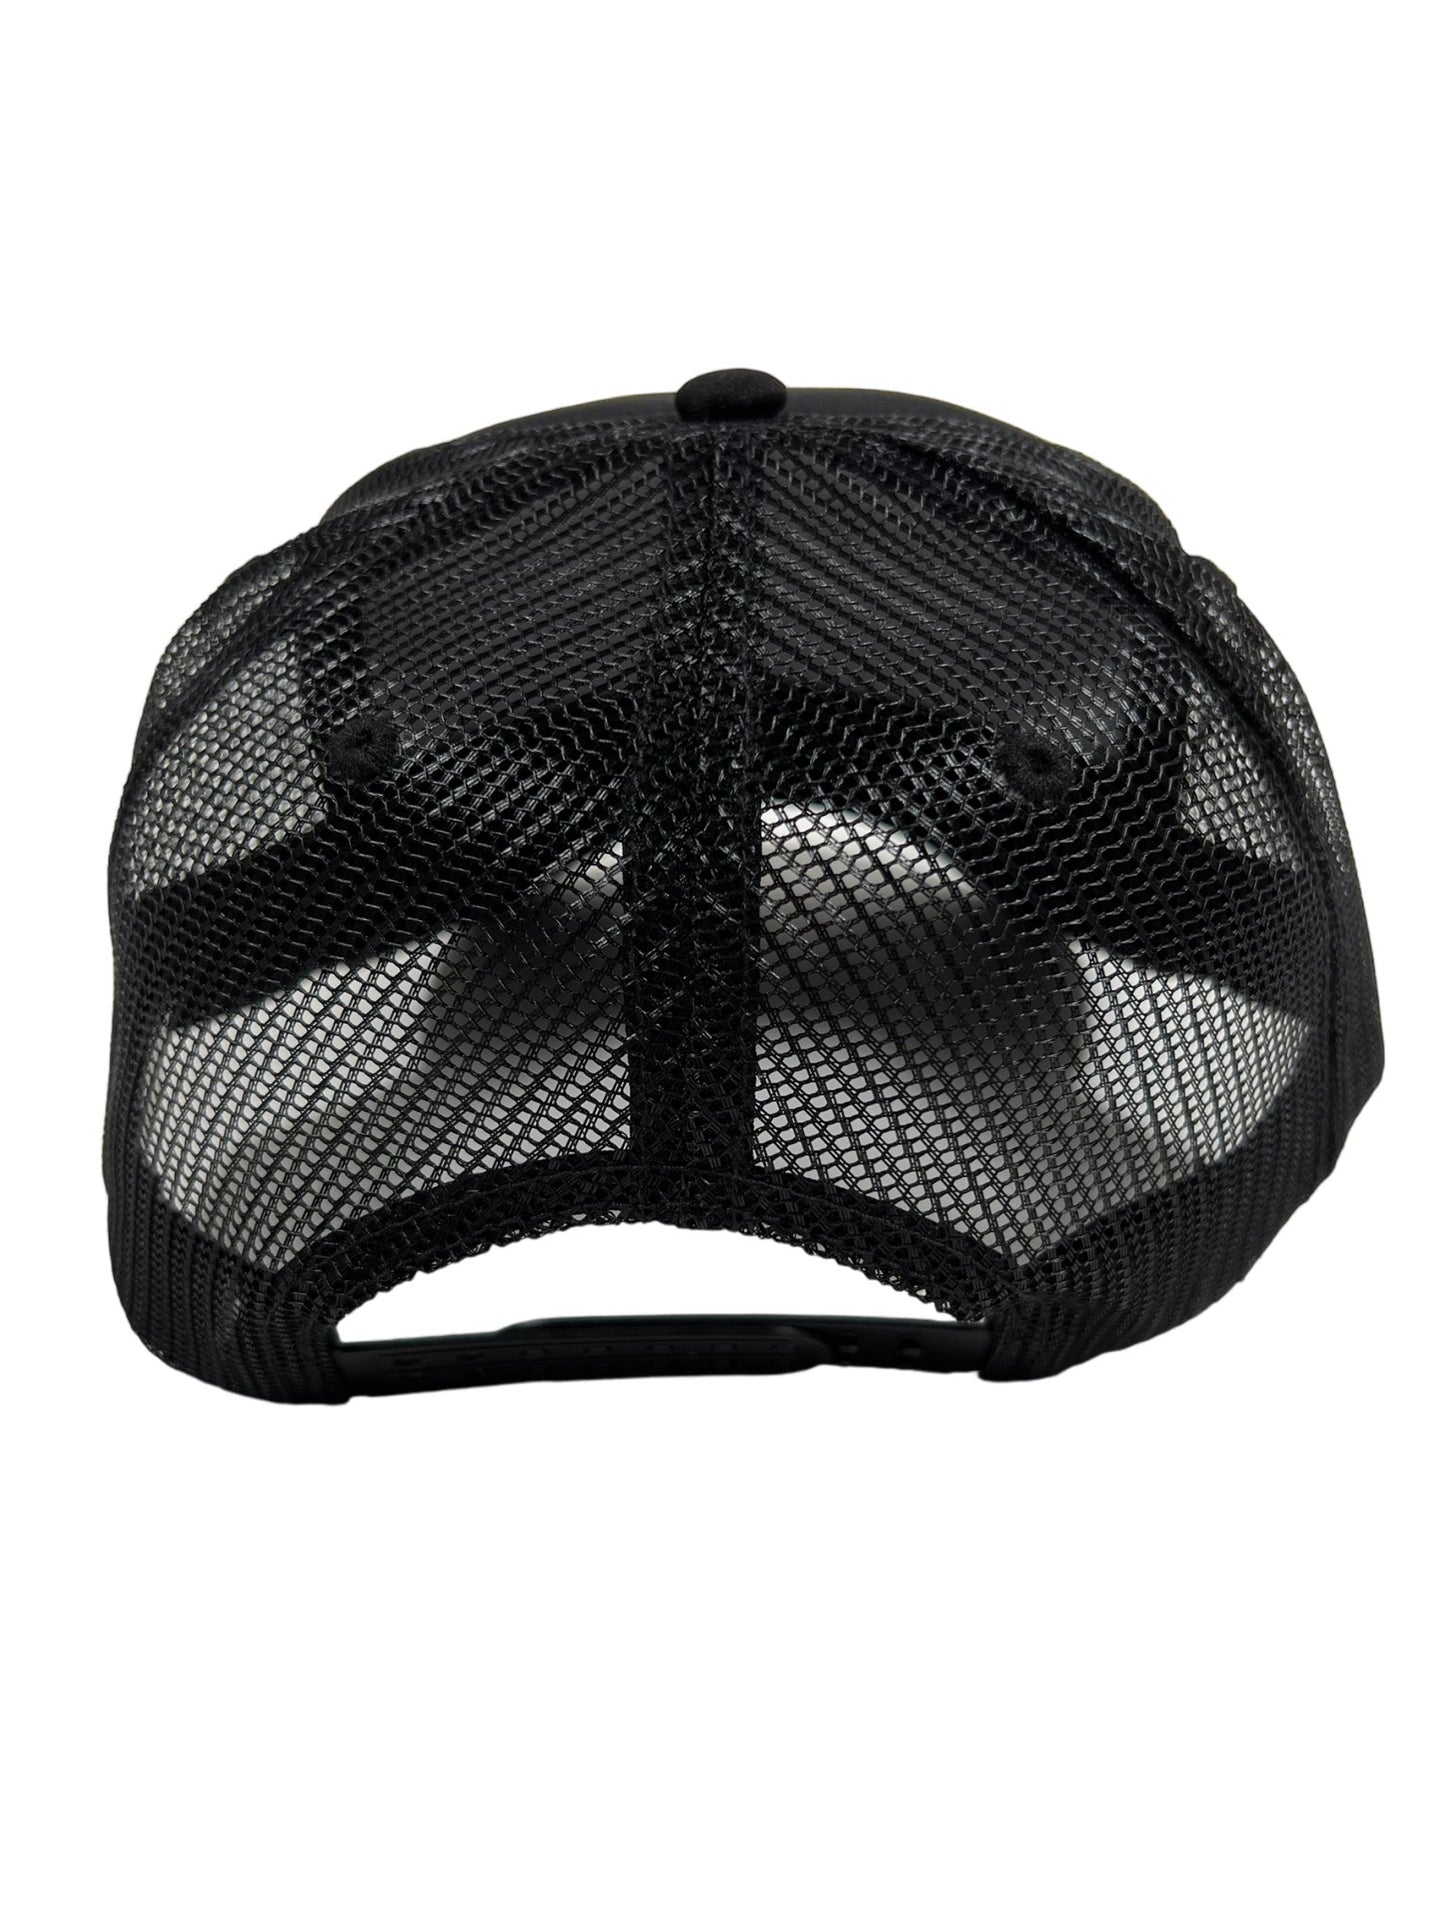 A black nylon mesh PLEASURES TWITCH TRUCKER CAP BLK with an adjustable snapback on a white background.